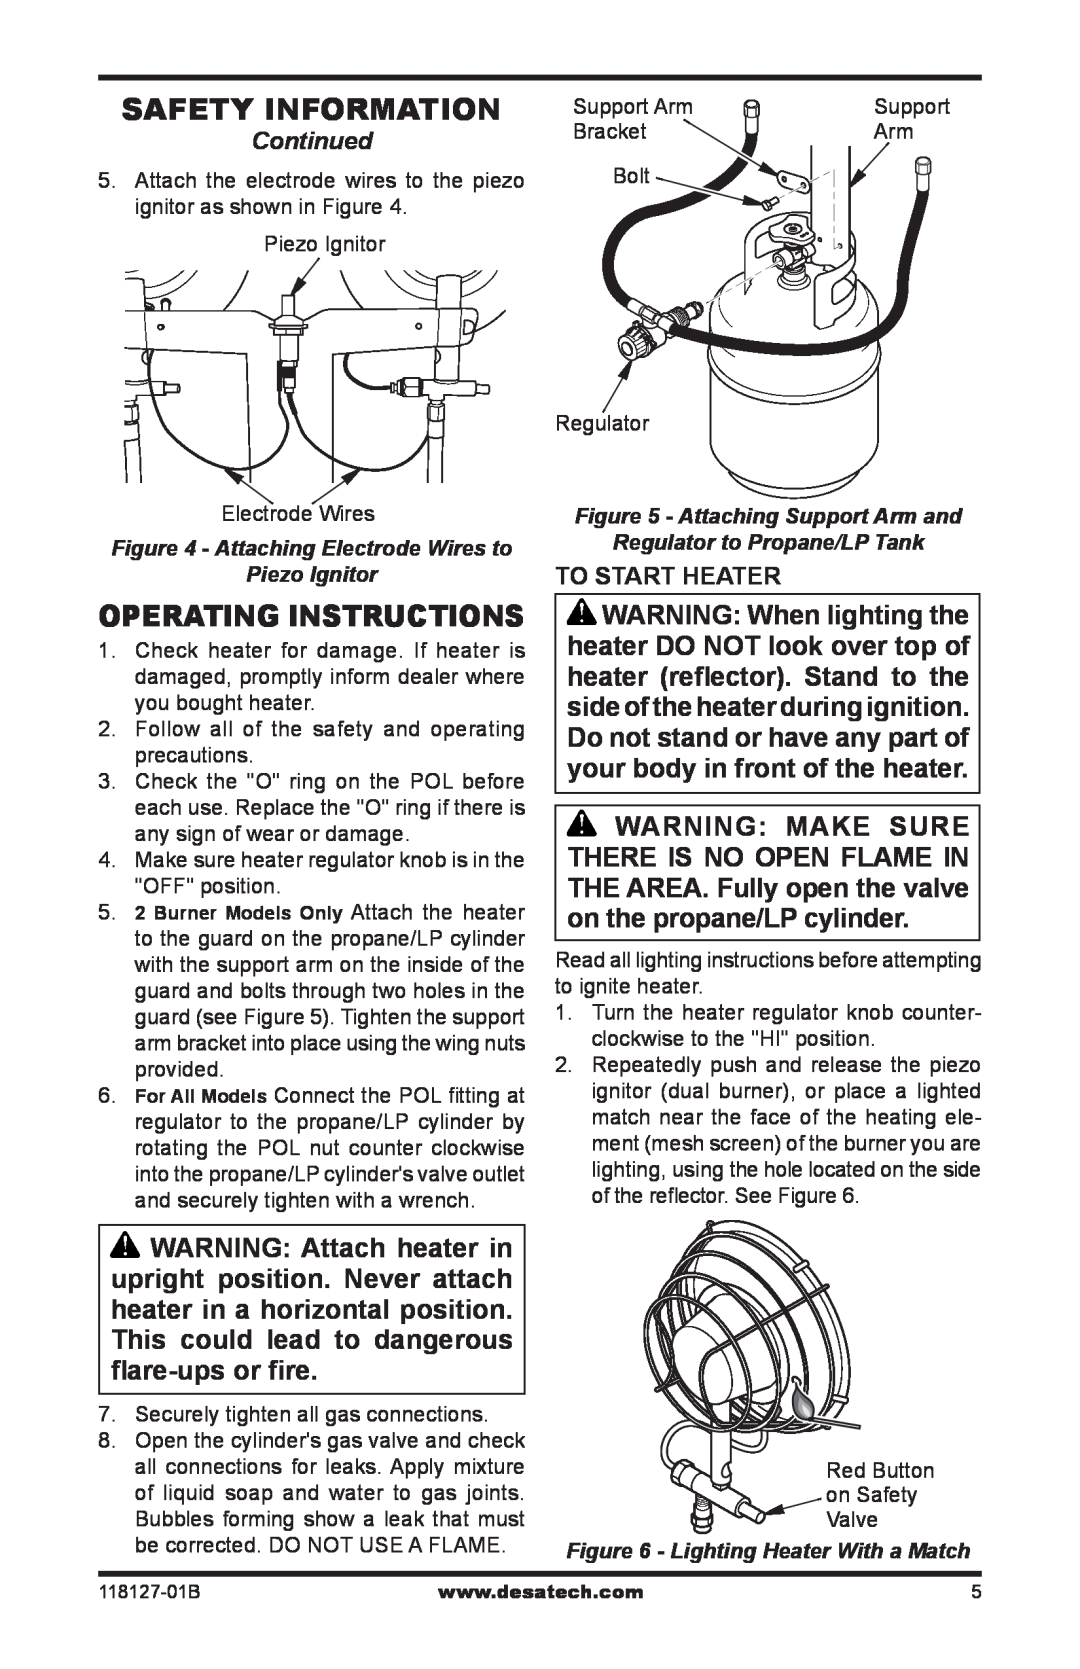 Desa TC111 8, TC110 8, 000-12, 050 BTU, 000-24 owner manual Safety Information, Operating Instructions, To START Heater 